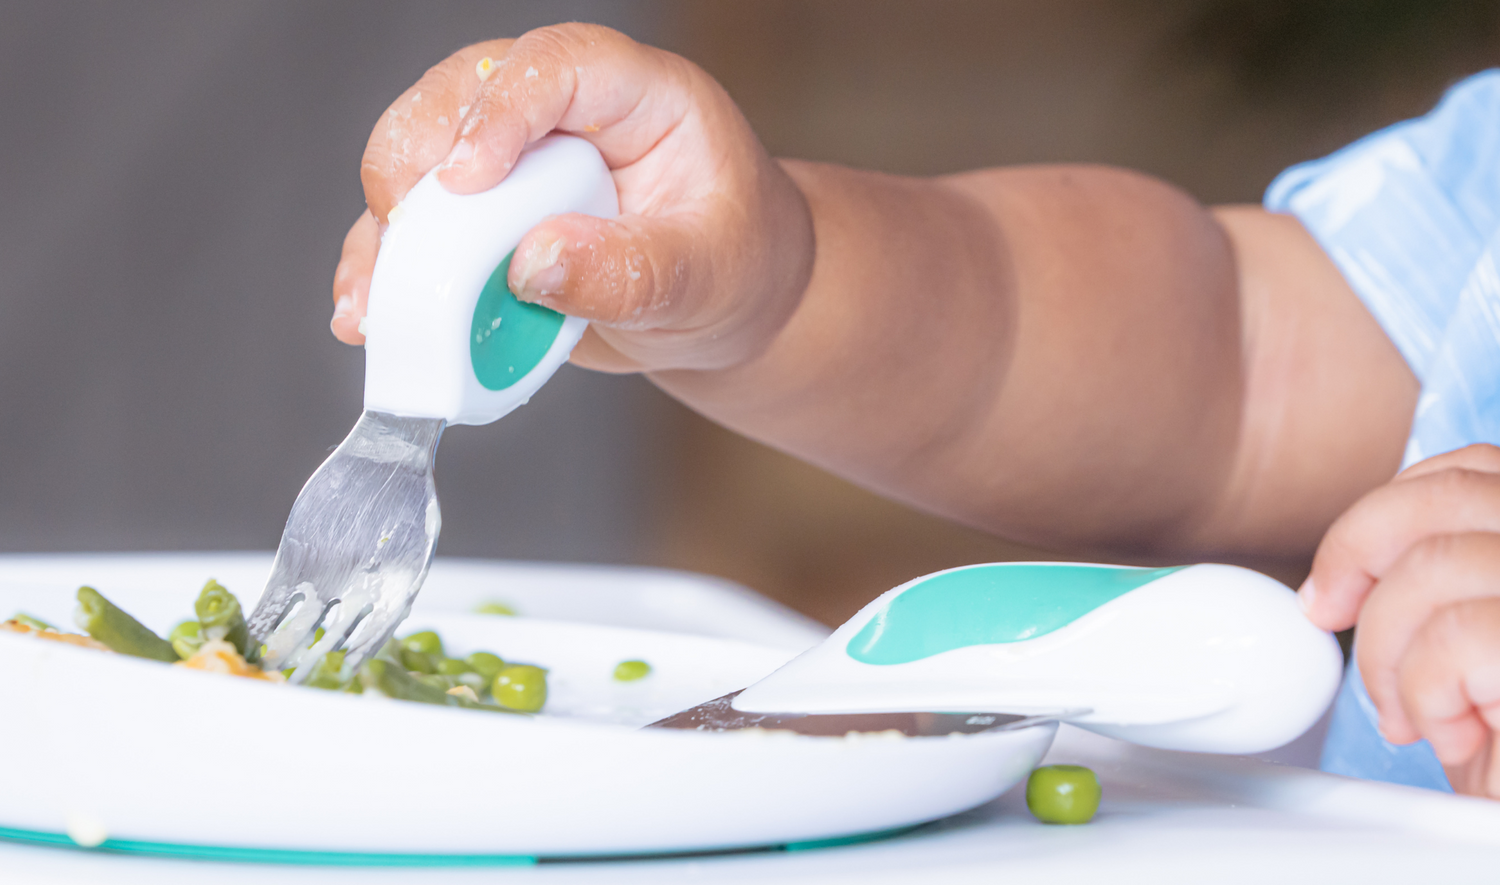 Toddler's food intake - little hand holding a doddl fork|Baby with blue spoon eating from a bowl|